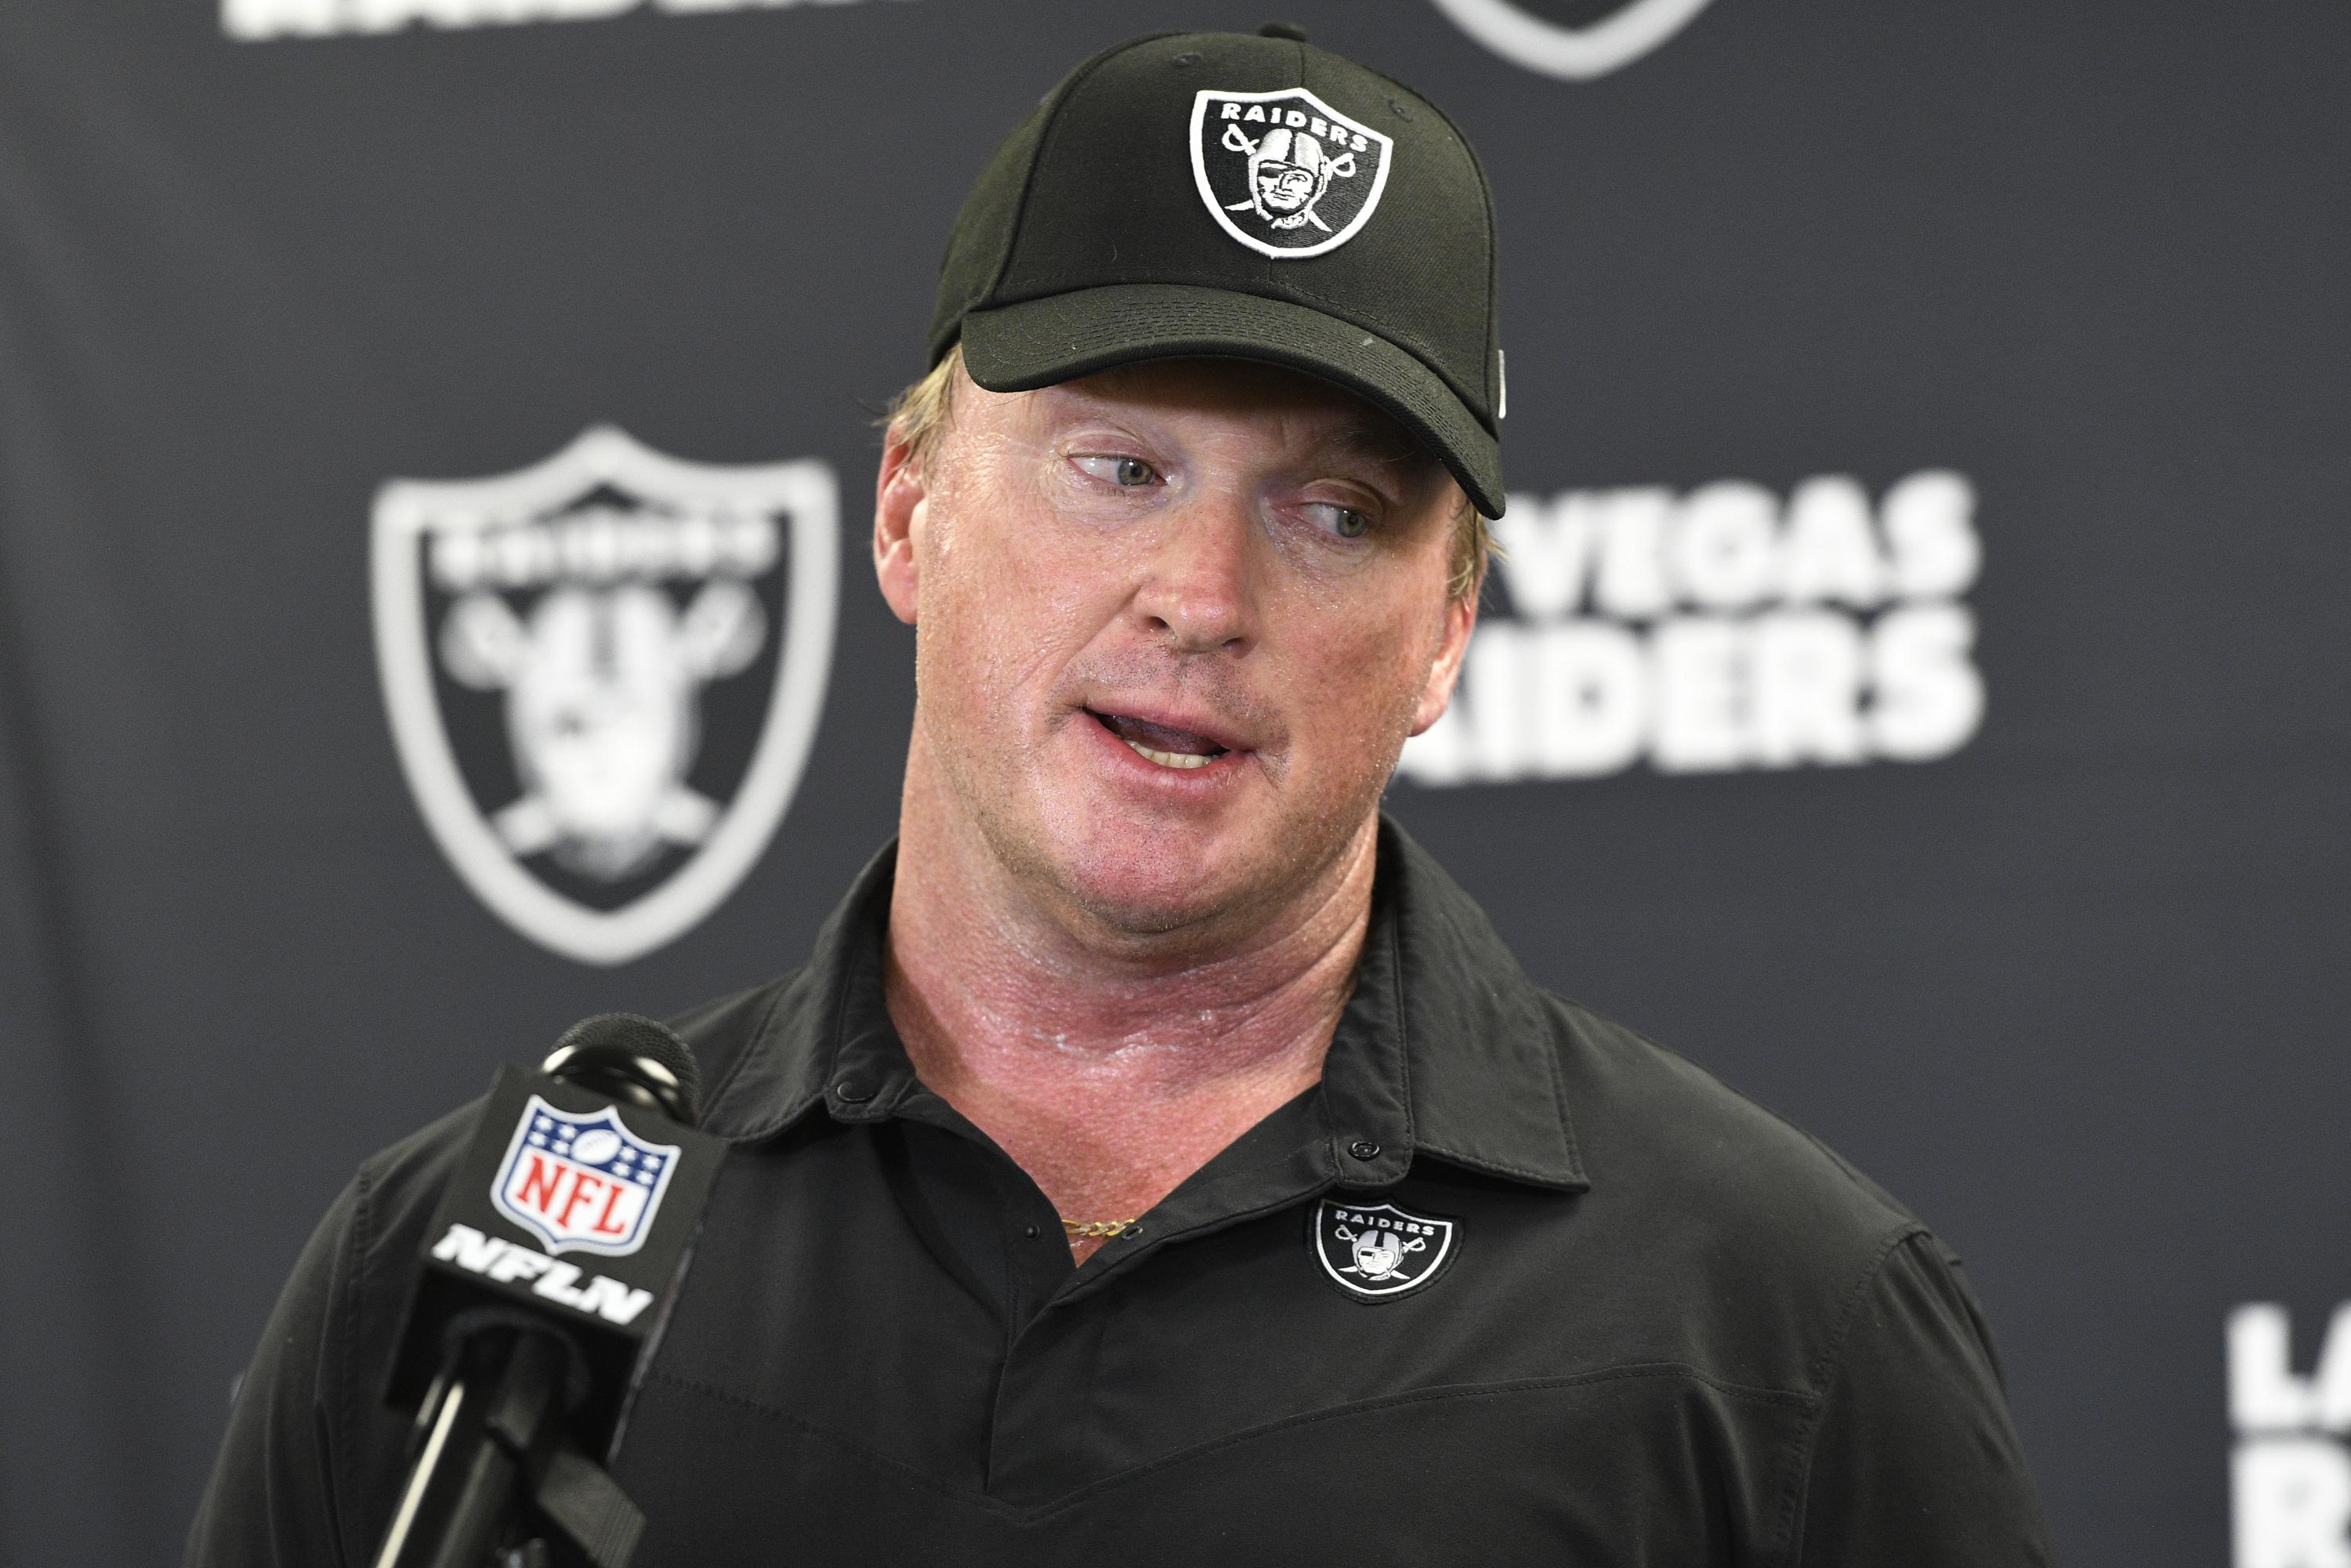 Jon Gruden resigns as Raiders coach over offensive emails | AP News